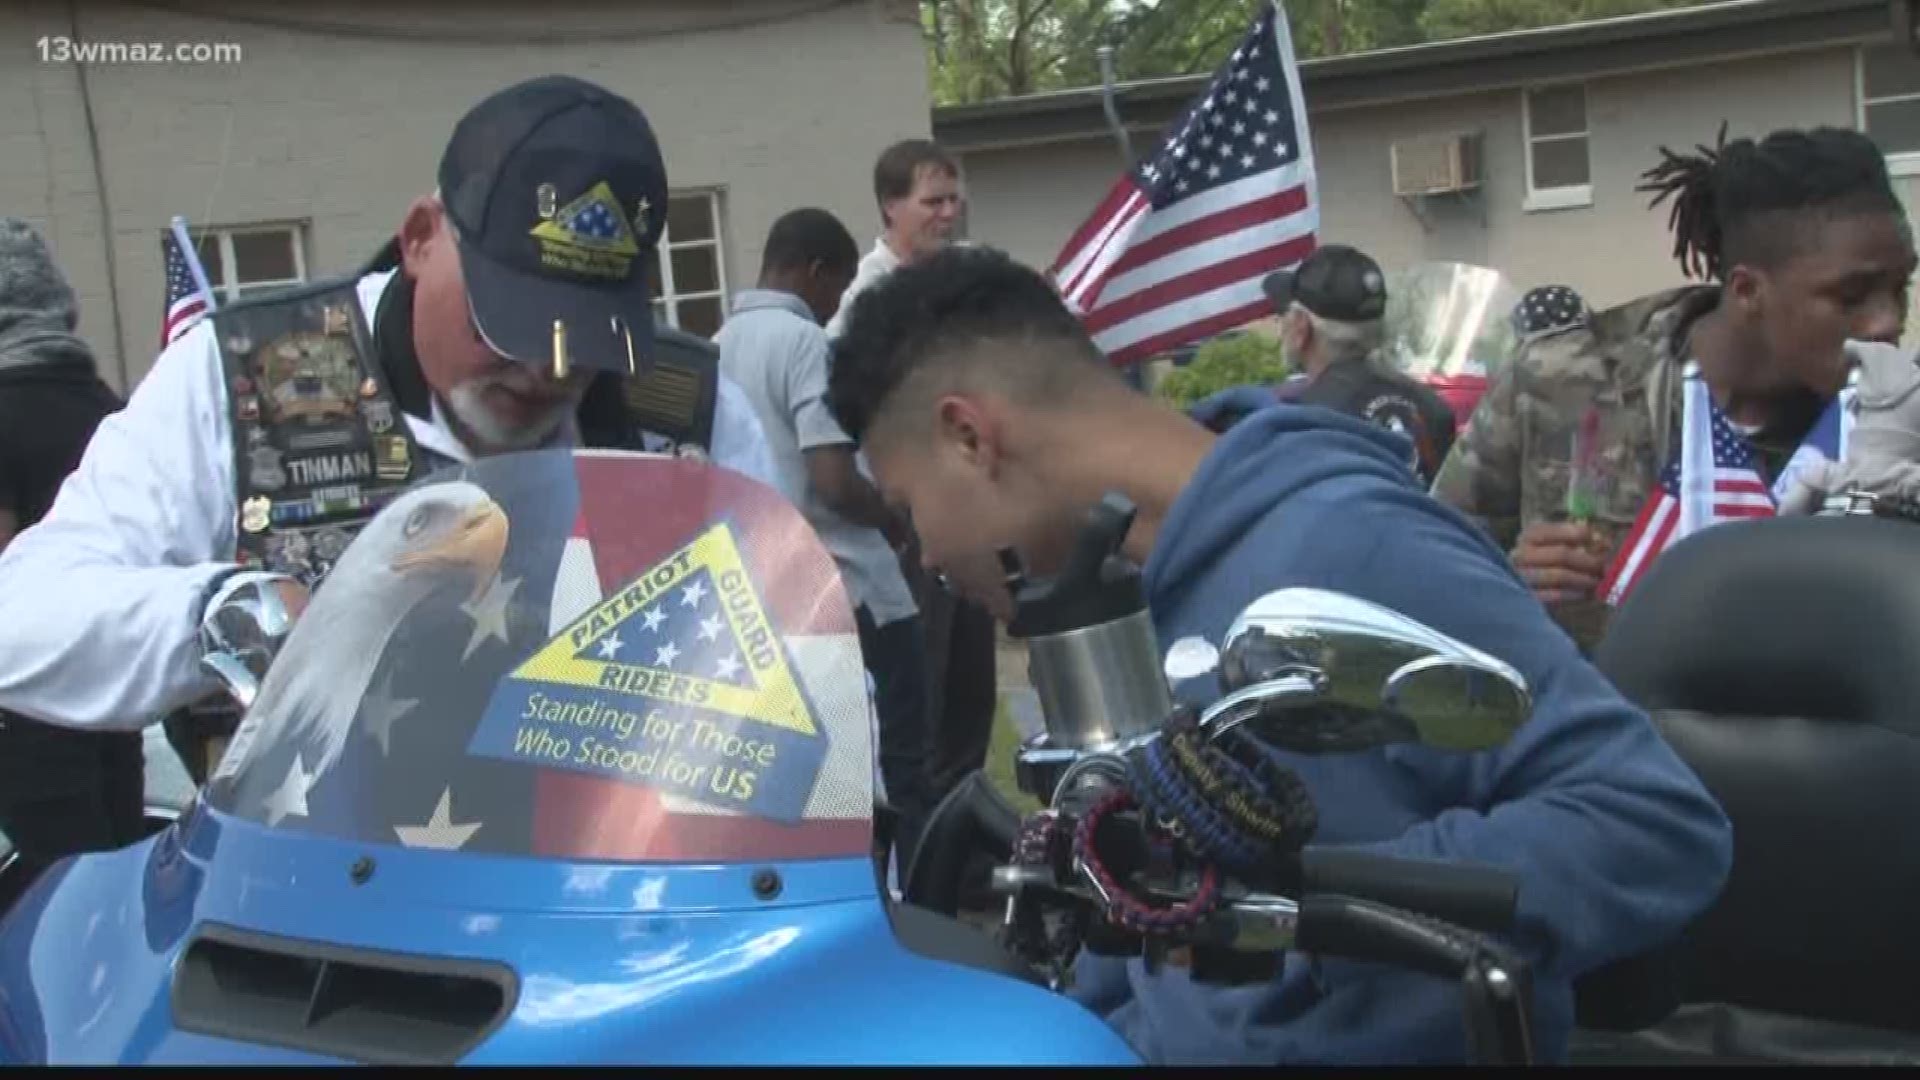 April is the Month of the Military Child, so students and staff at the Georgia Academy for the Blind got together to celebrate. They were also joined by the Patriot Guard Riders. Students got to meet the motorcyclists and learn about their bikes over popsicles.